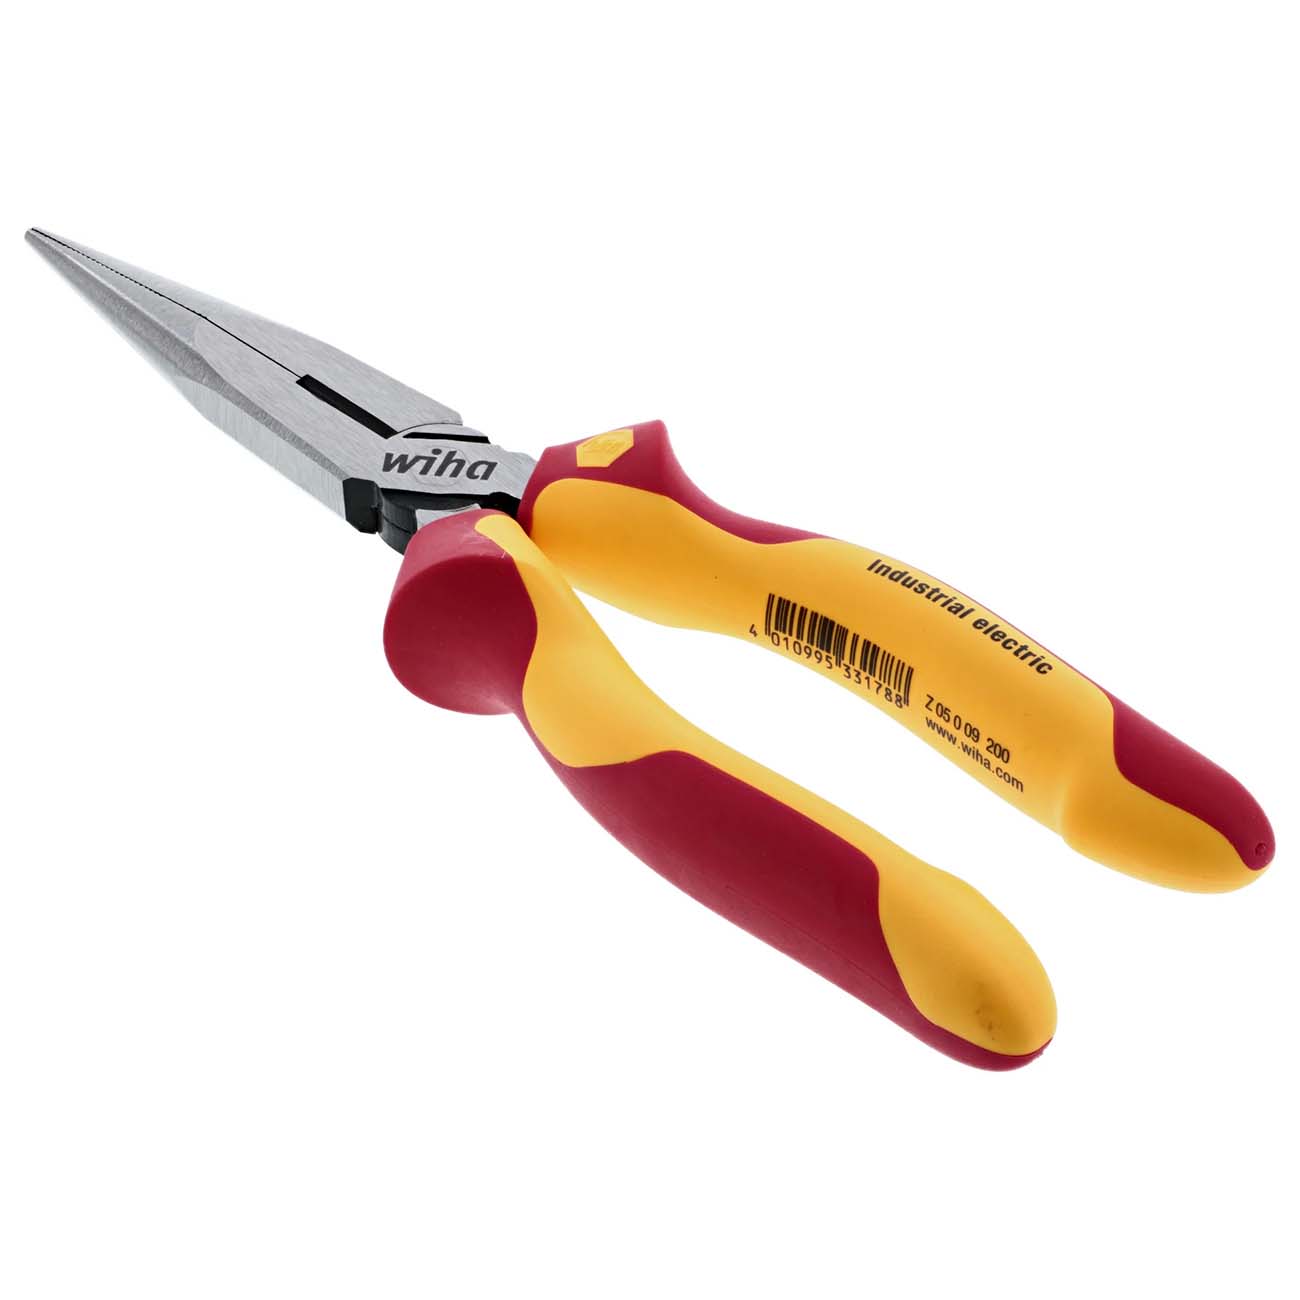 Wiha Insulated Industrial Long Nose Pliers - 8" Overall Length